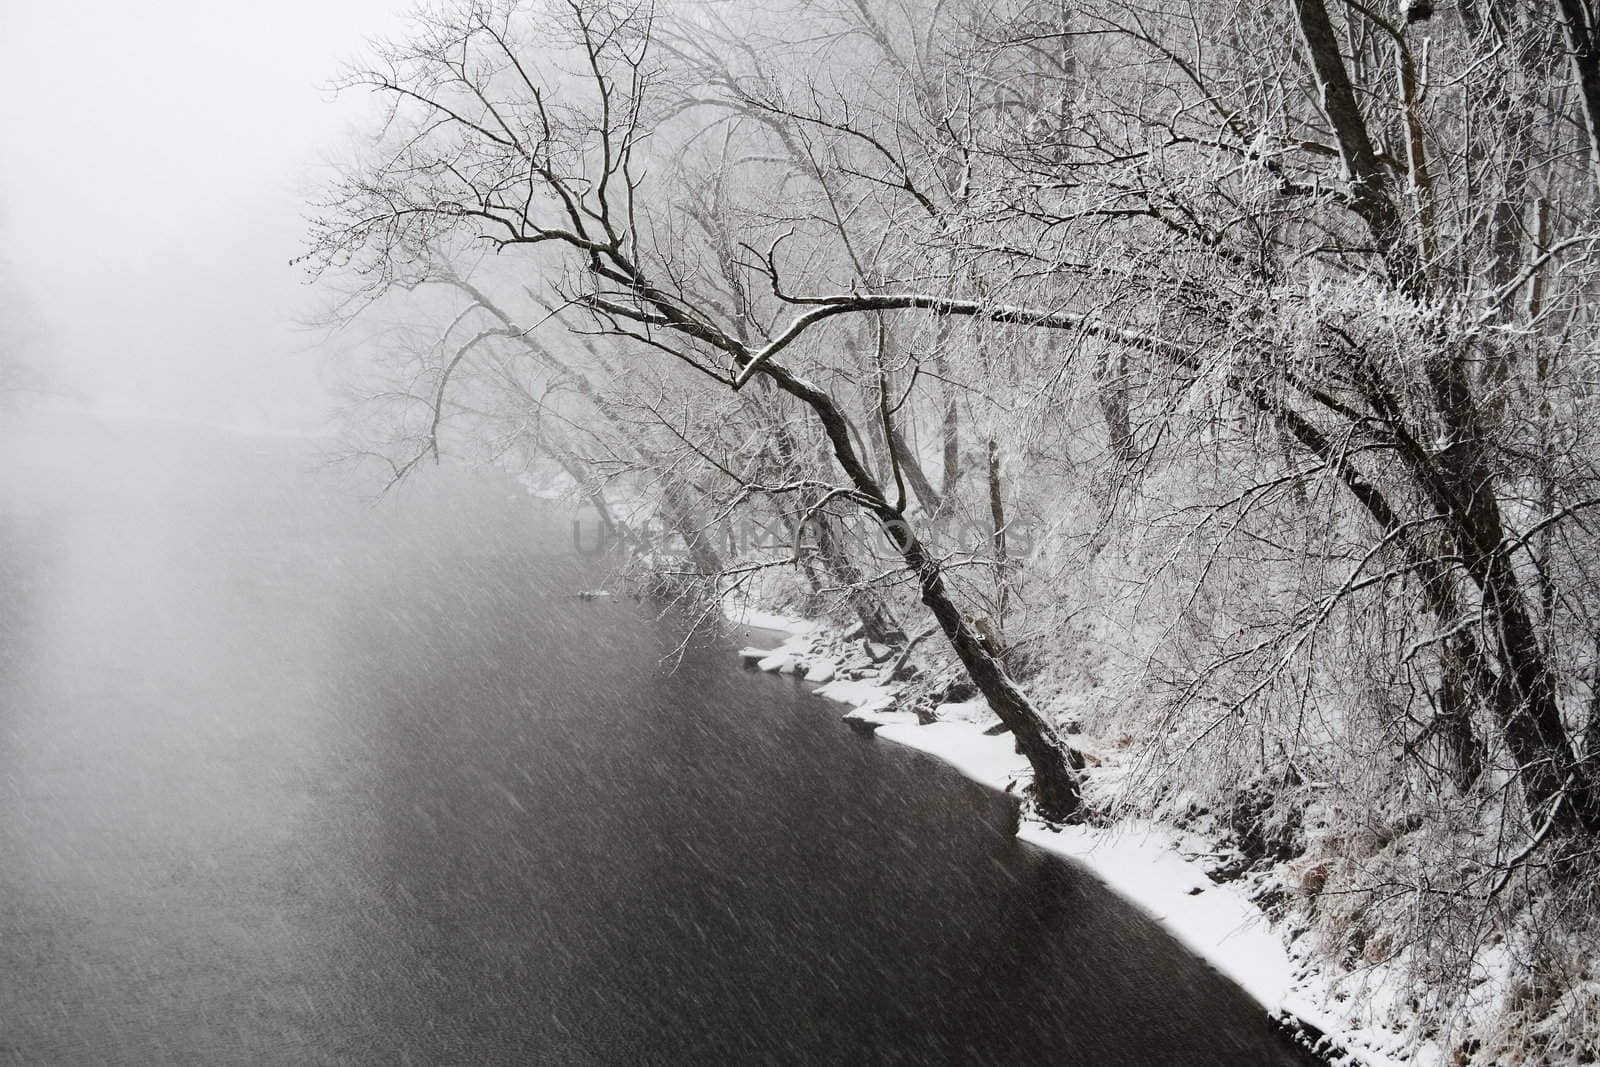 High contrast image of a river flowing through a snow storm.